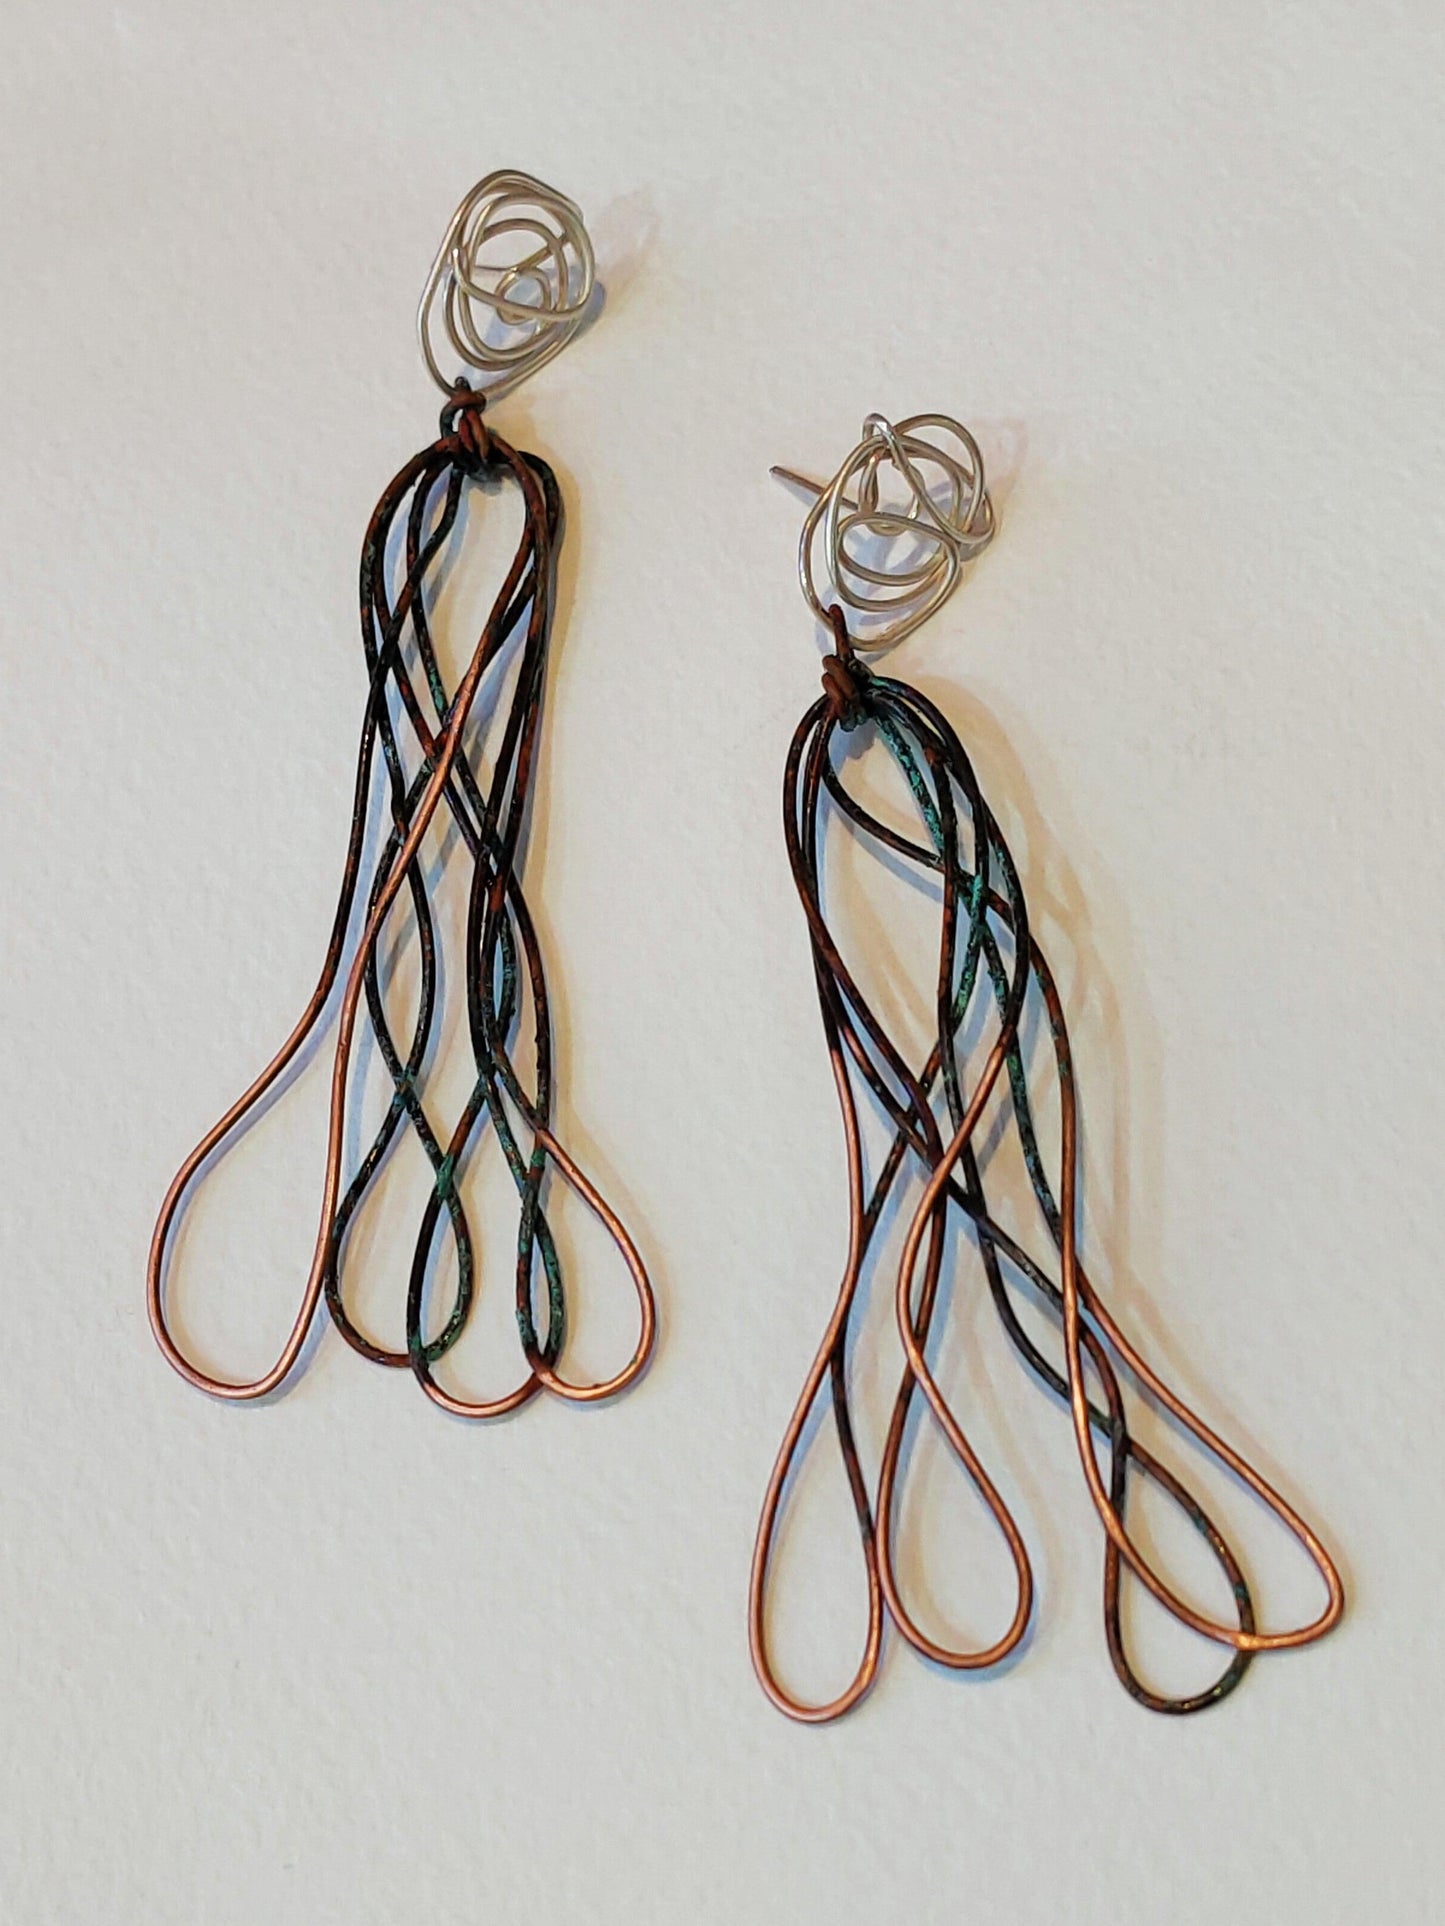 Copper and silver earrings. rust colors